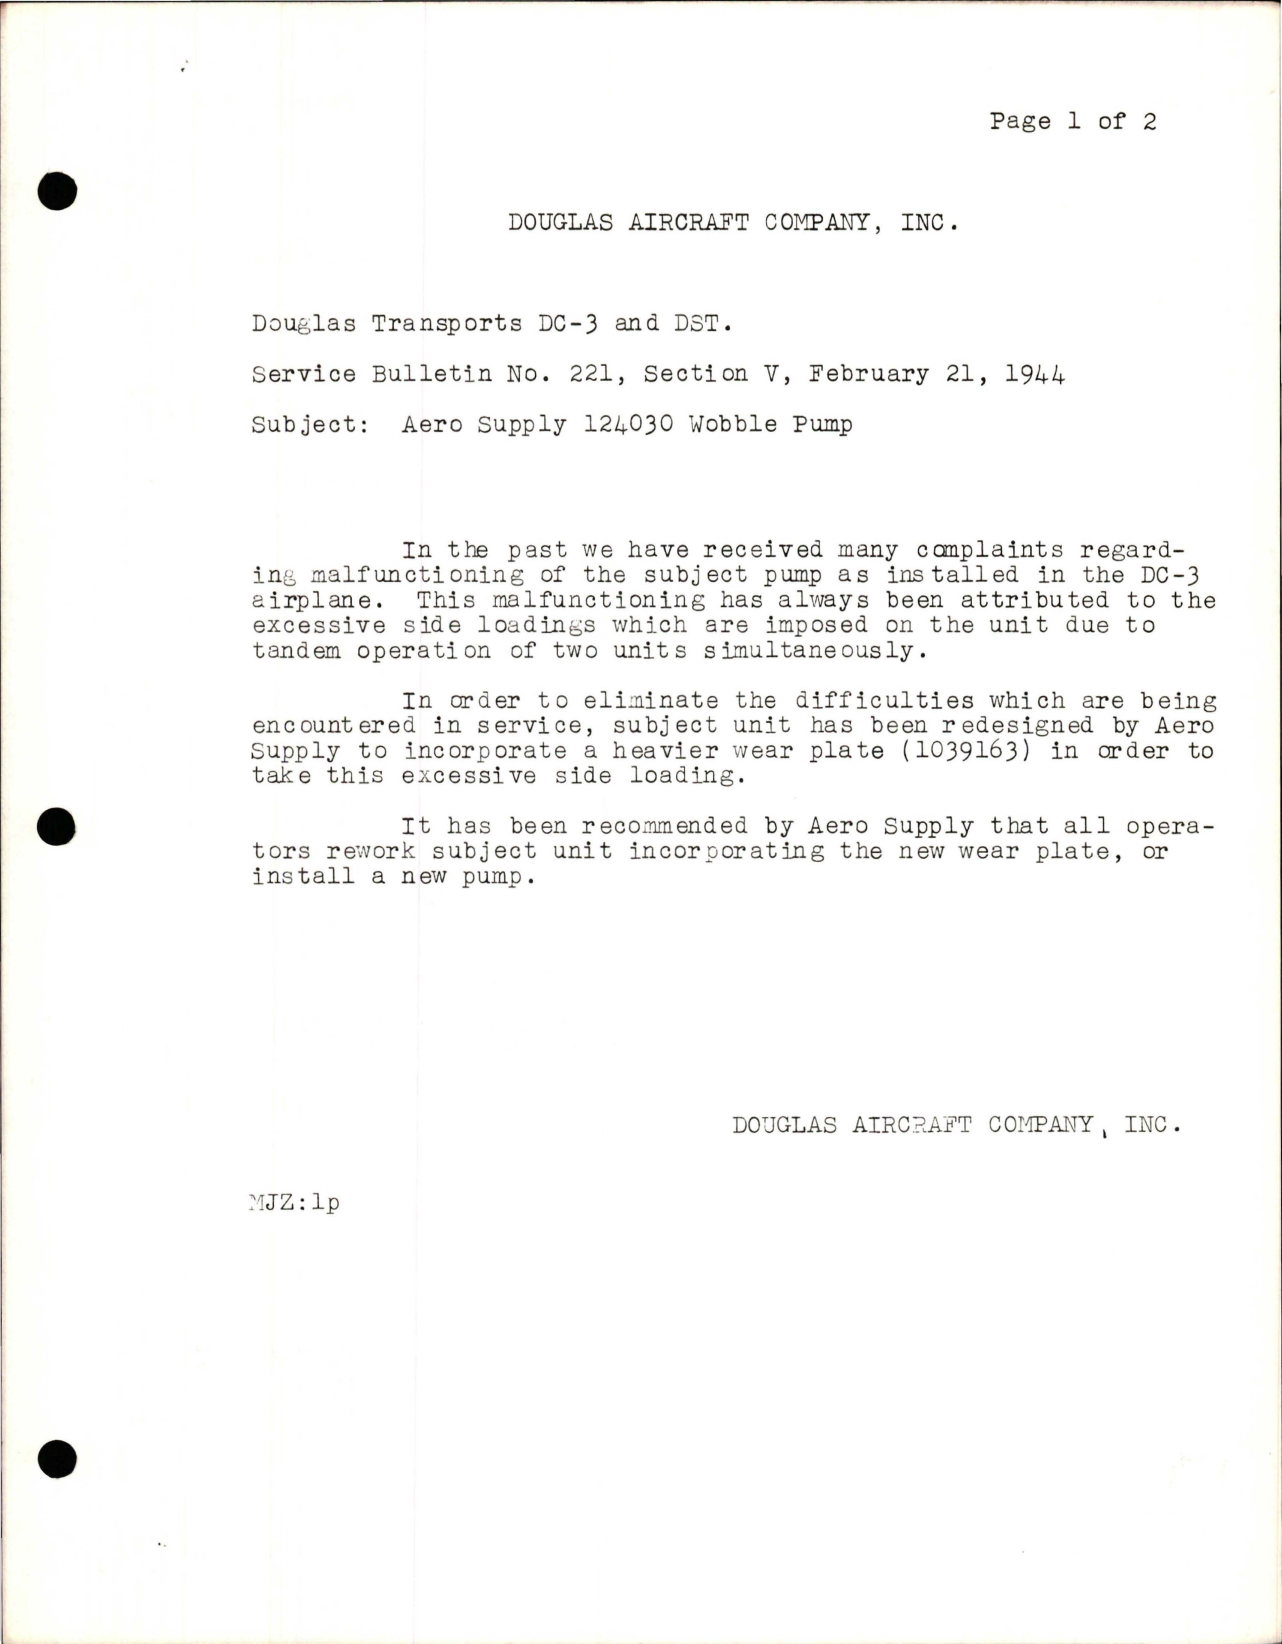 Sample page 1 from AirCorps Library document: Aero Supply 124030 Wobble Pump